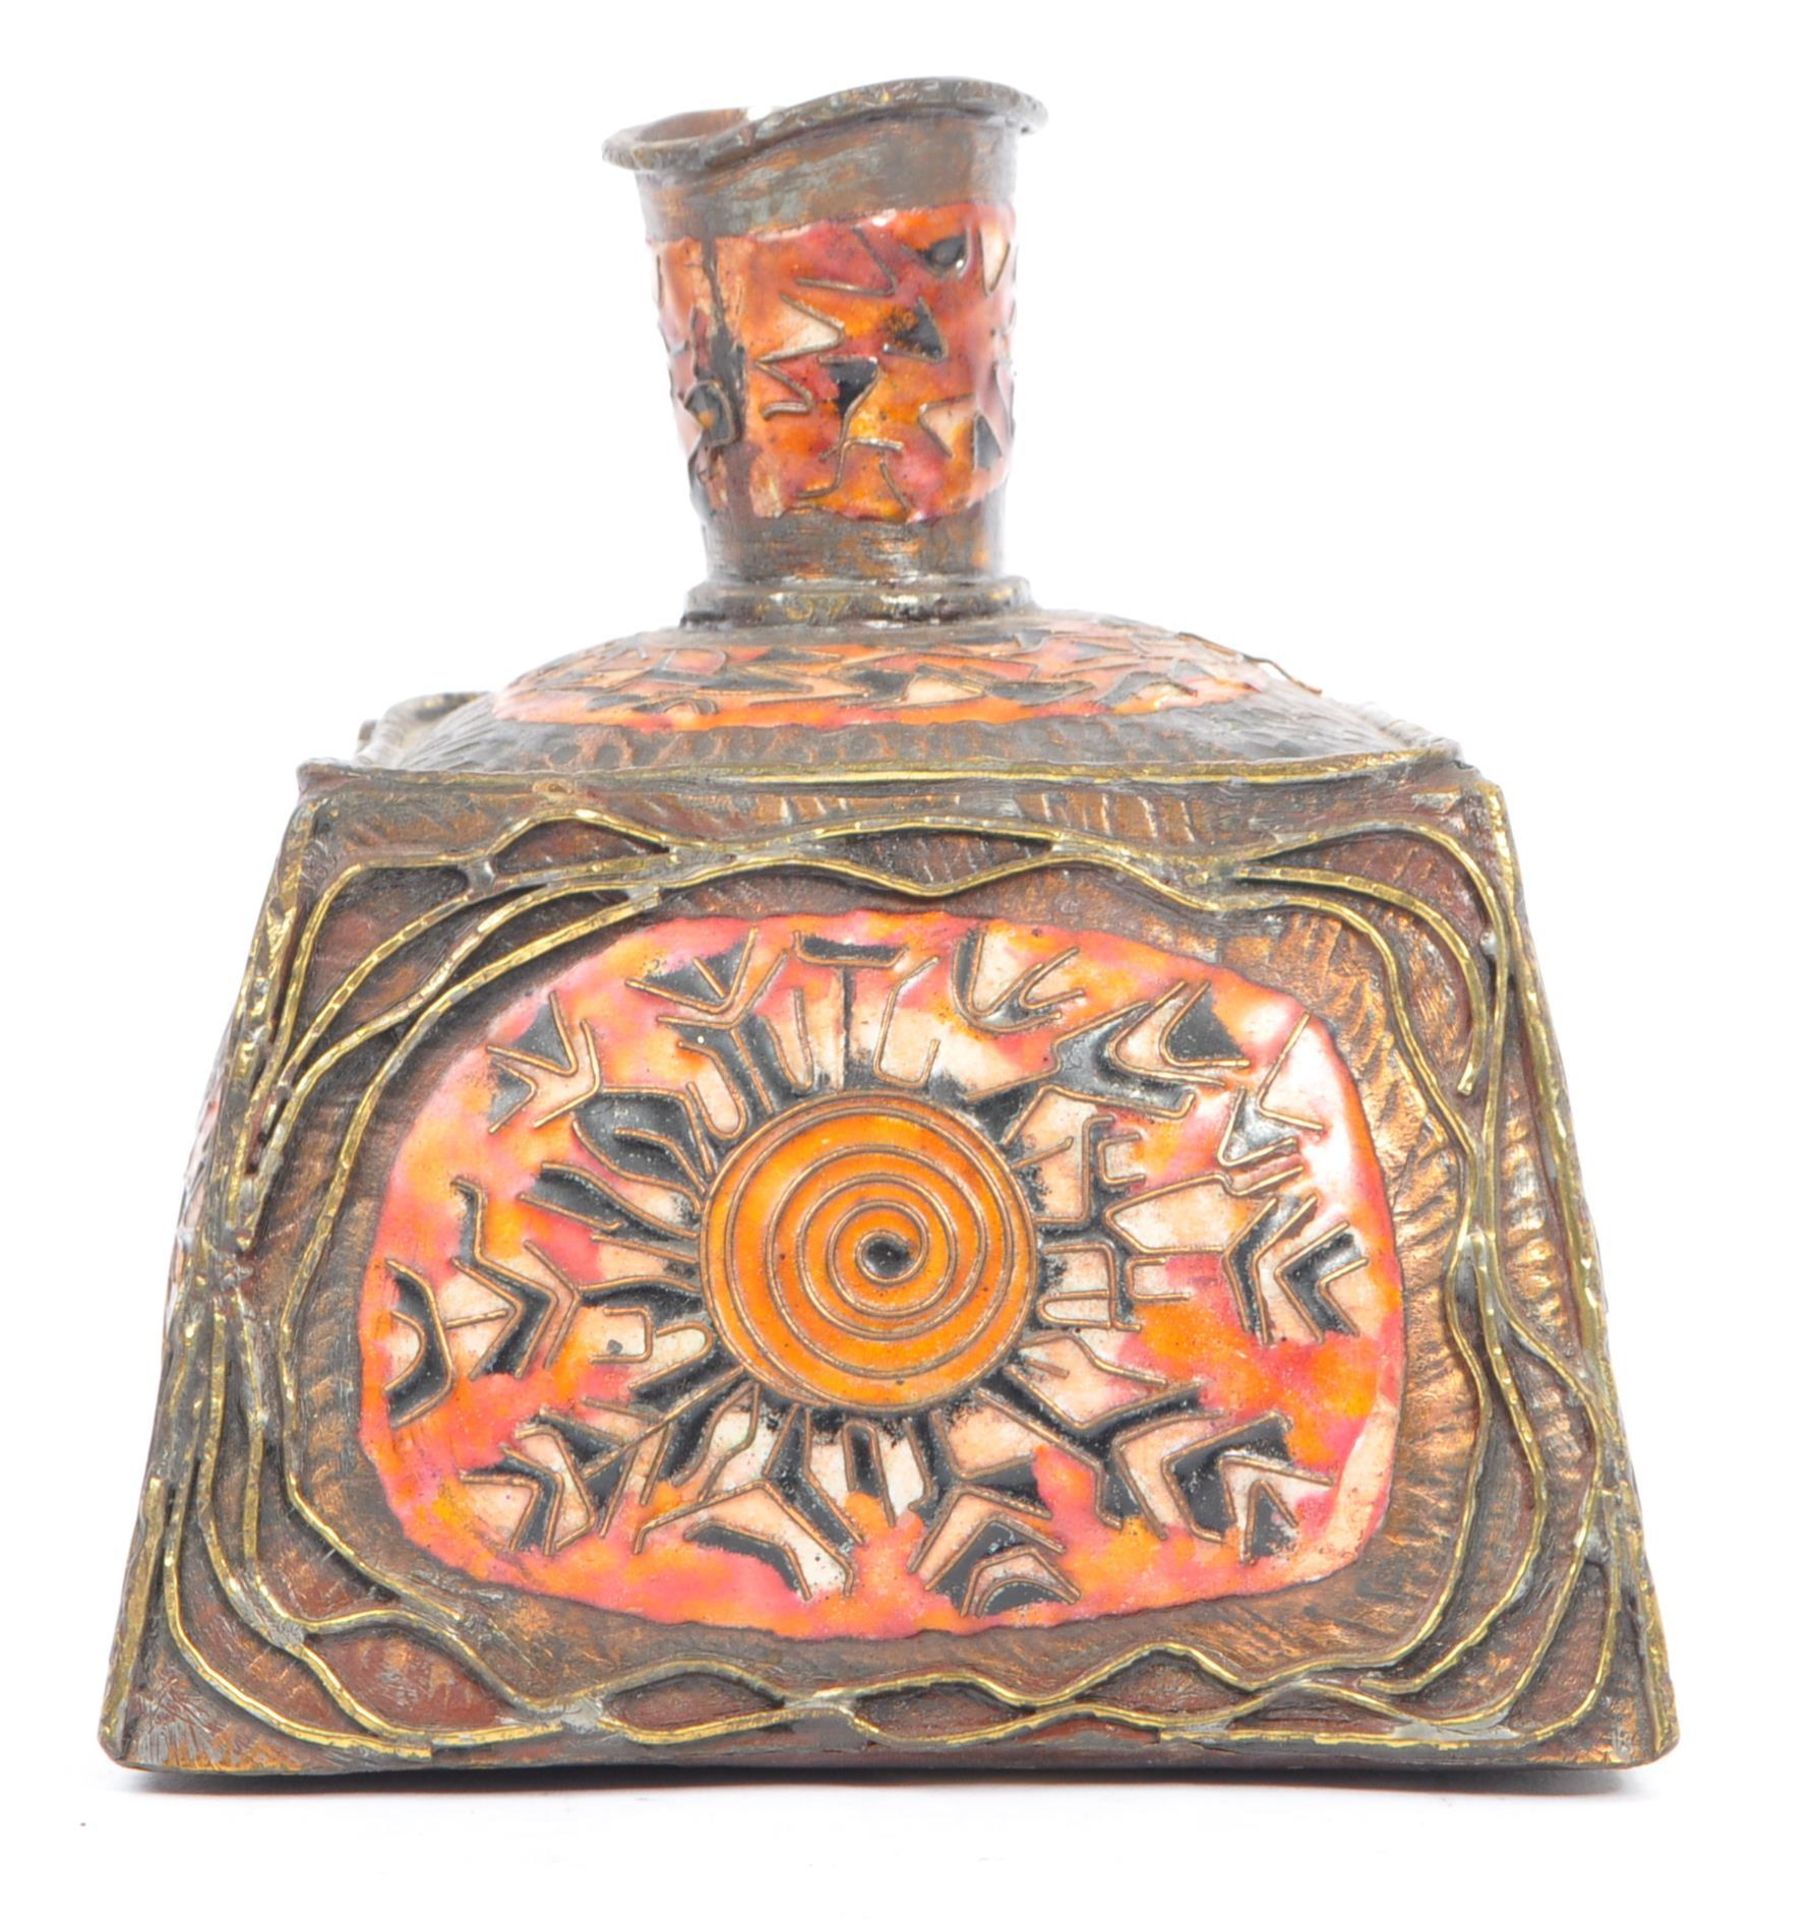 EARLY 20TH CENTURY MIDDLE EASTERN ENAMELLED BRASS VASE - Image 3 of 6